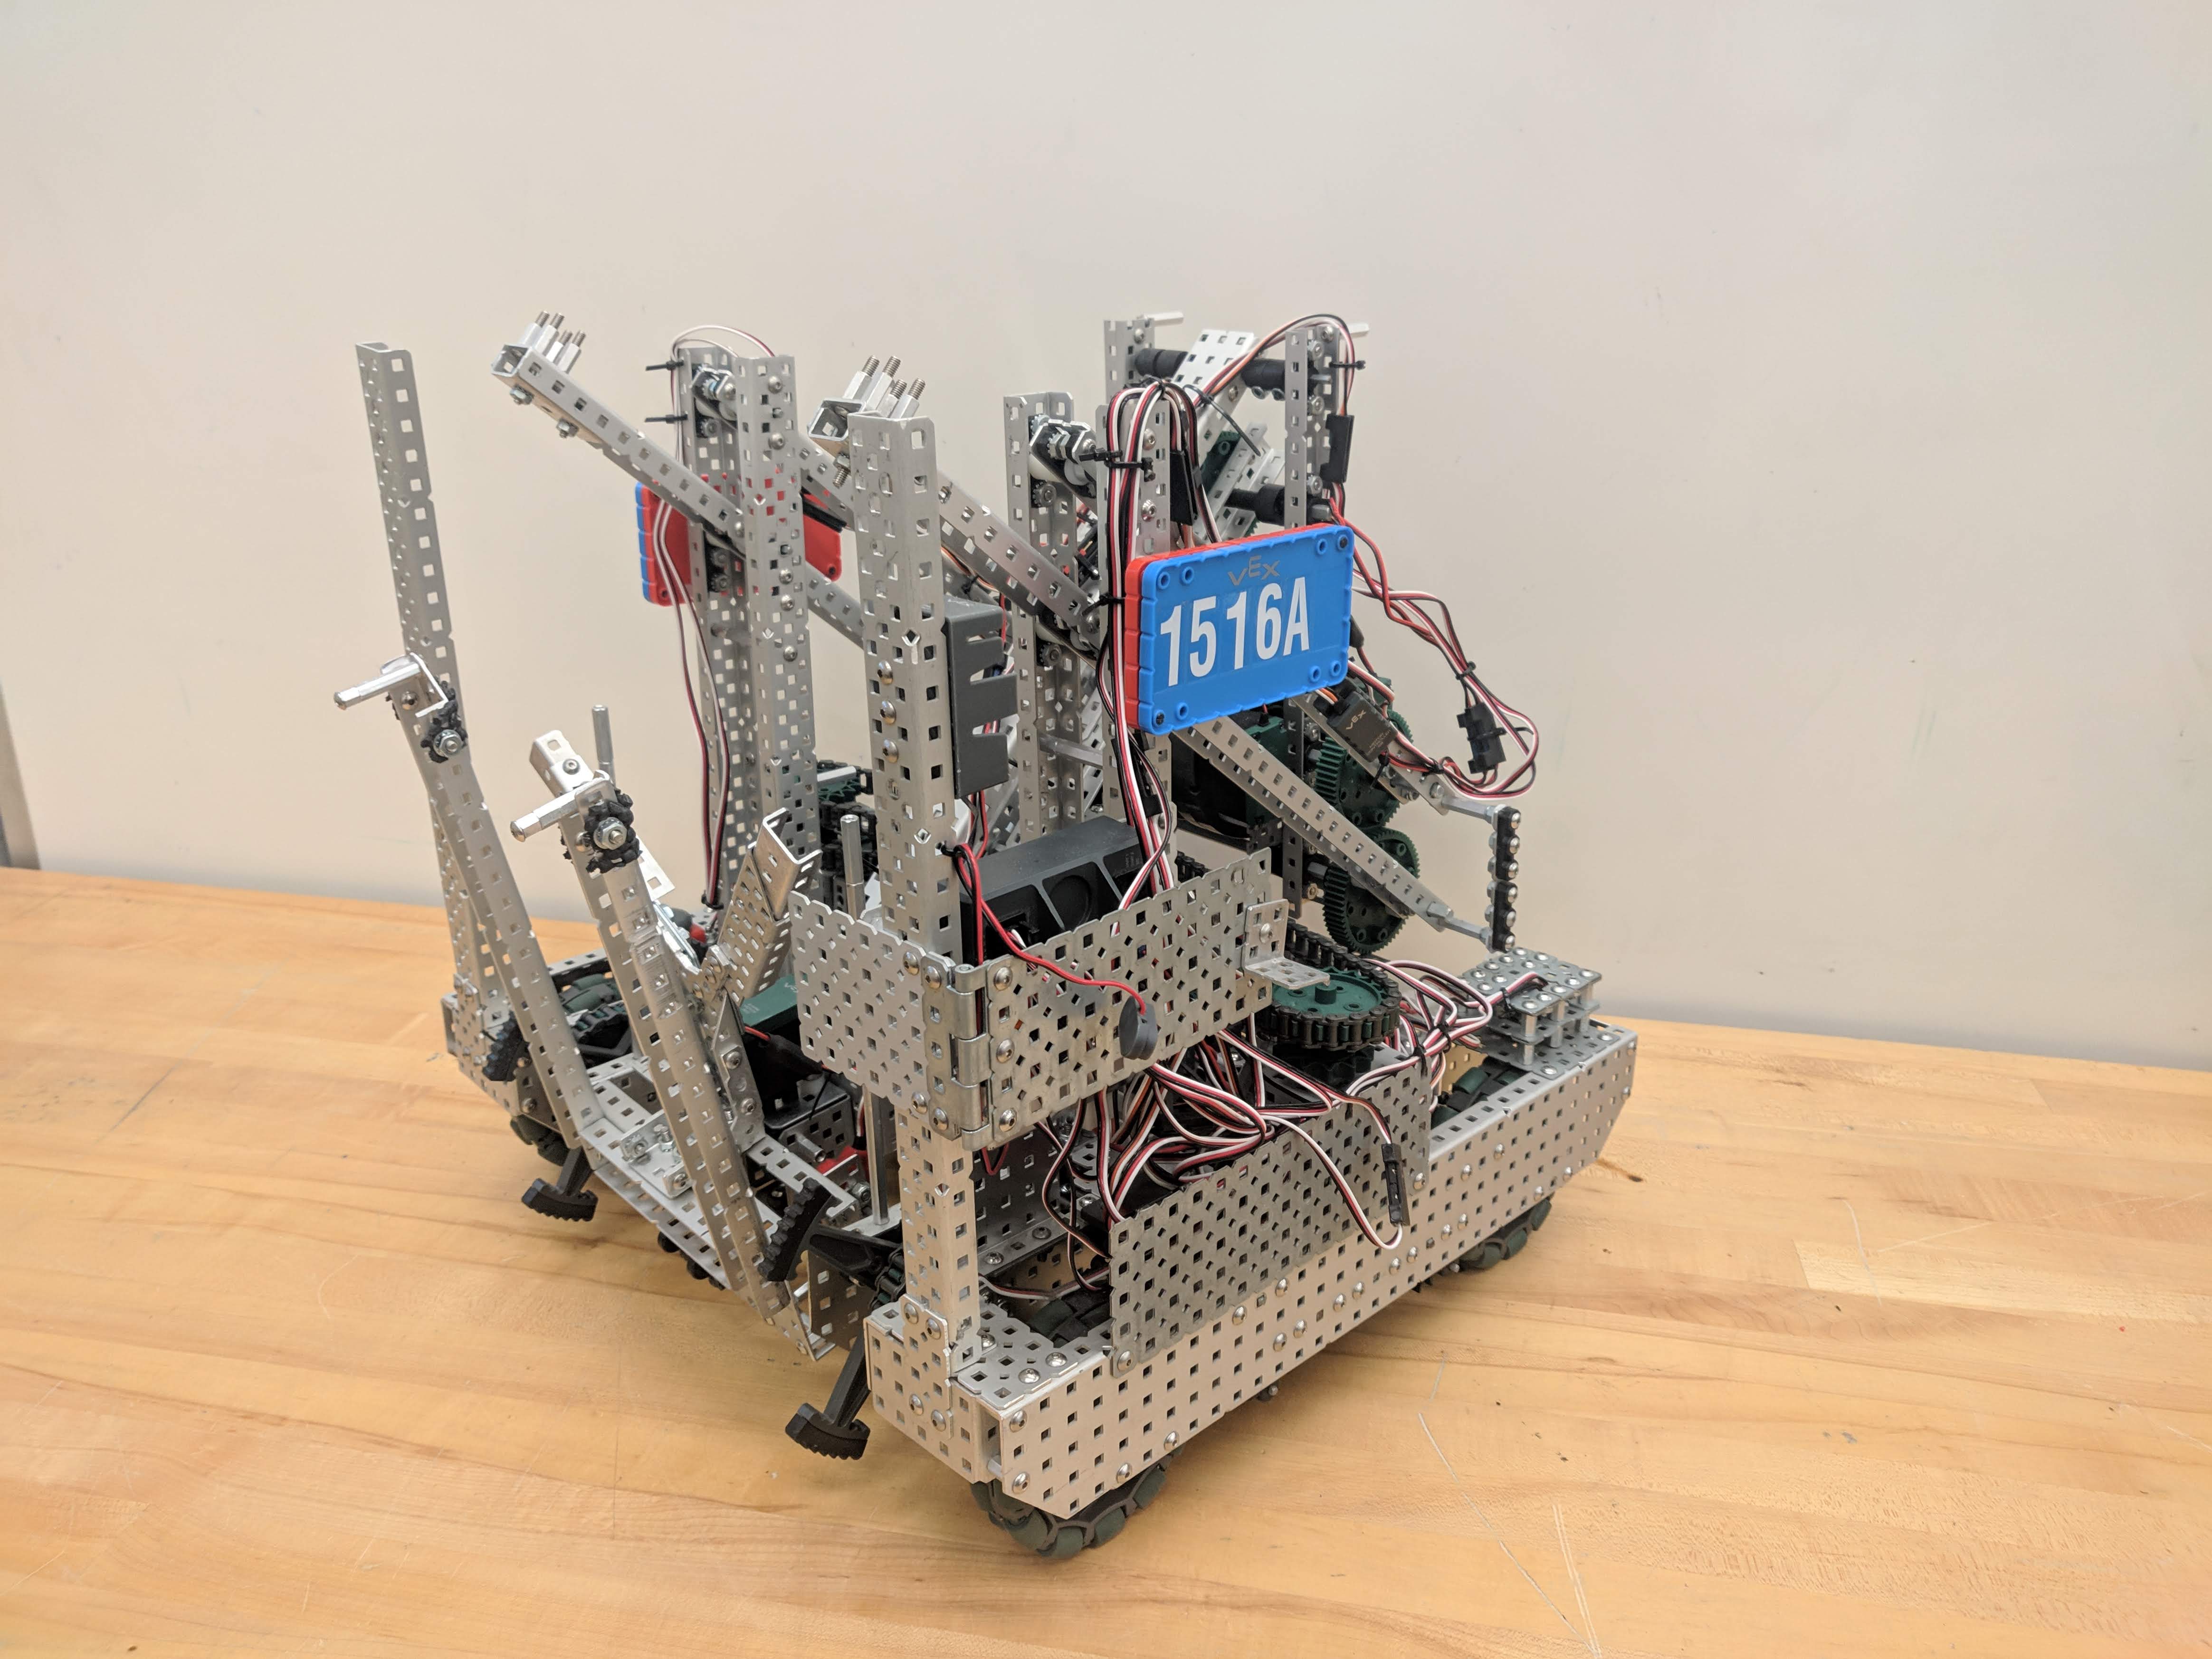 The 1516A Robot from the VEX Tipping Point Season.